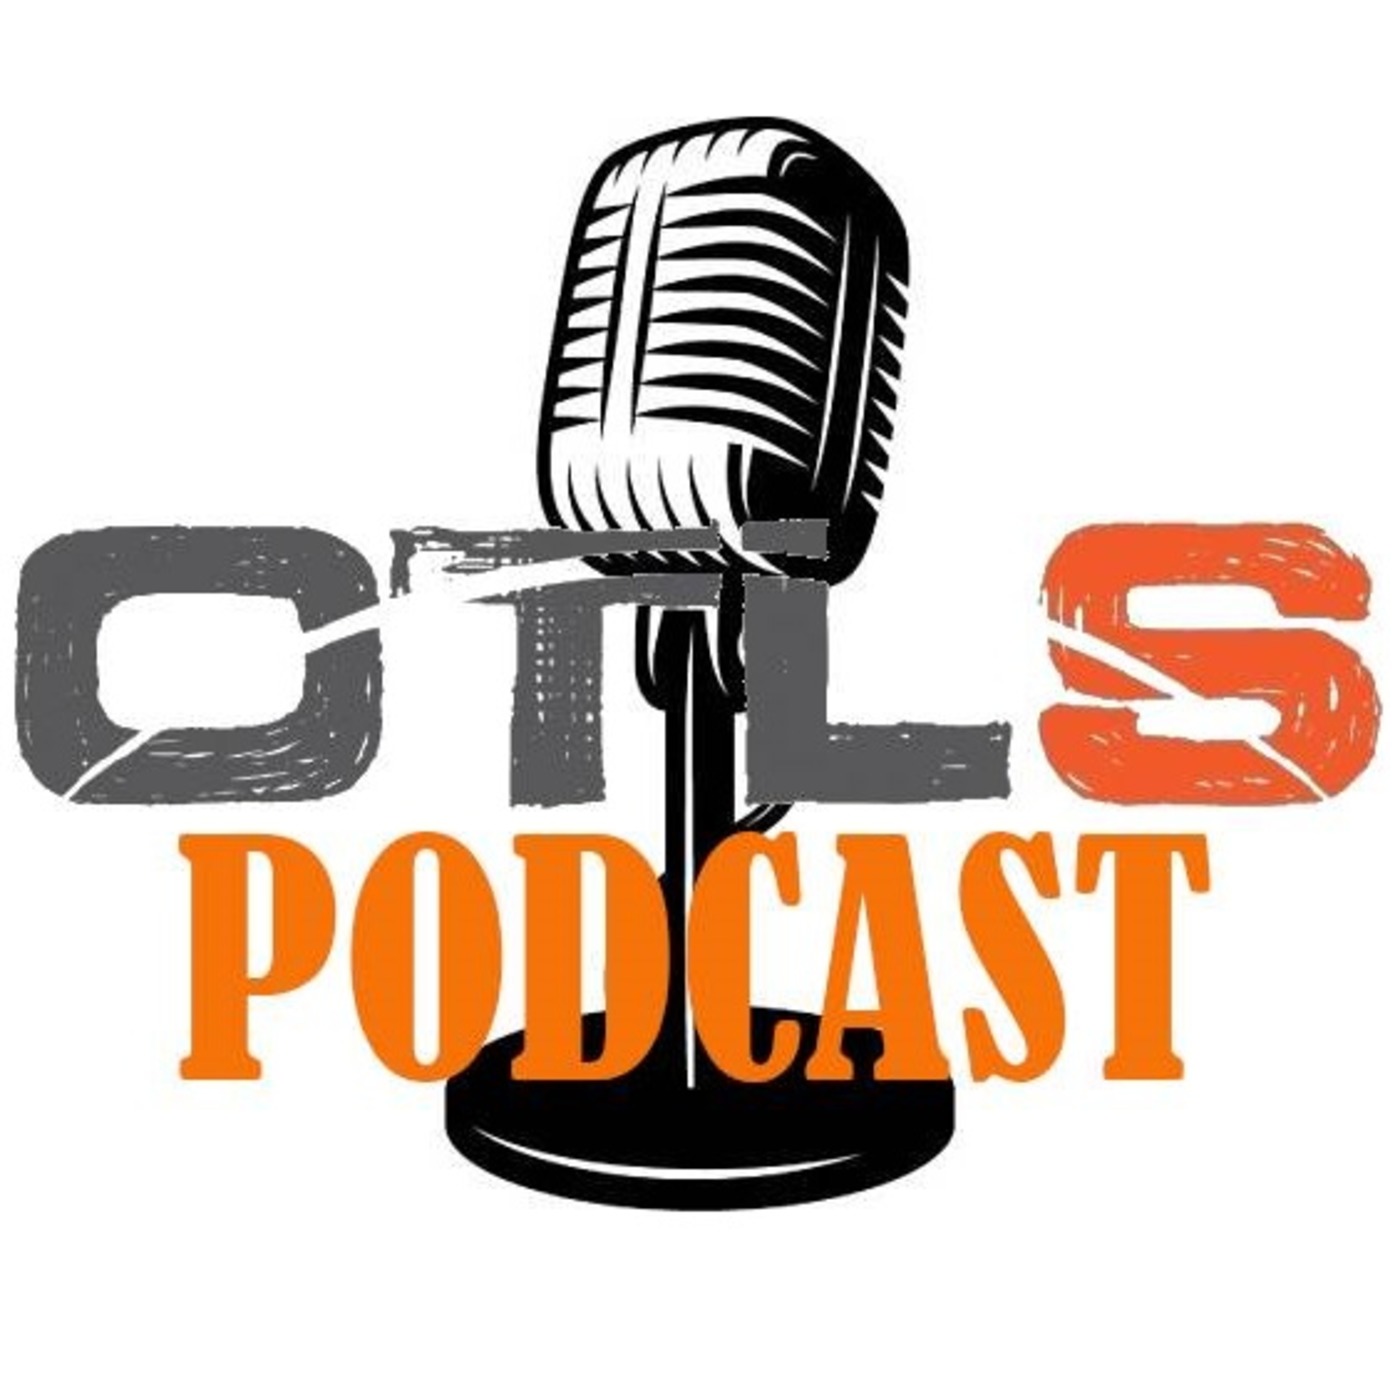 OTLS Podcast - Everything AFL Fantasy, SuperCoach, Real Dream Team and Ultimate Footy